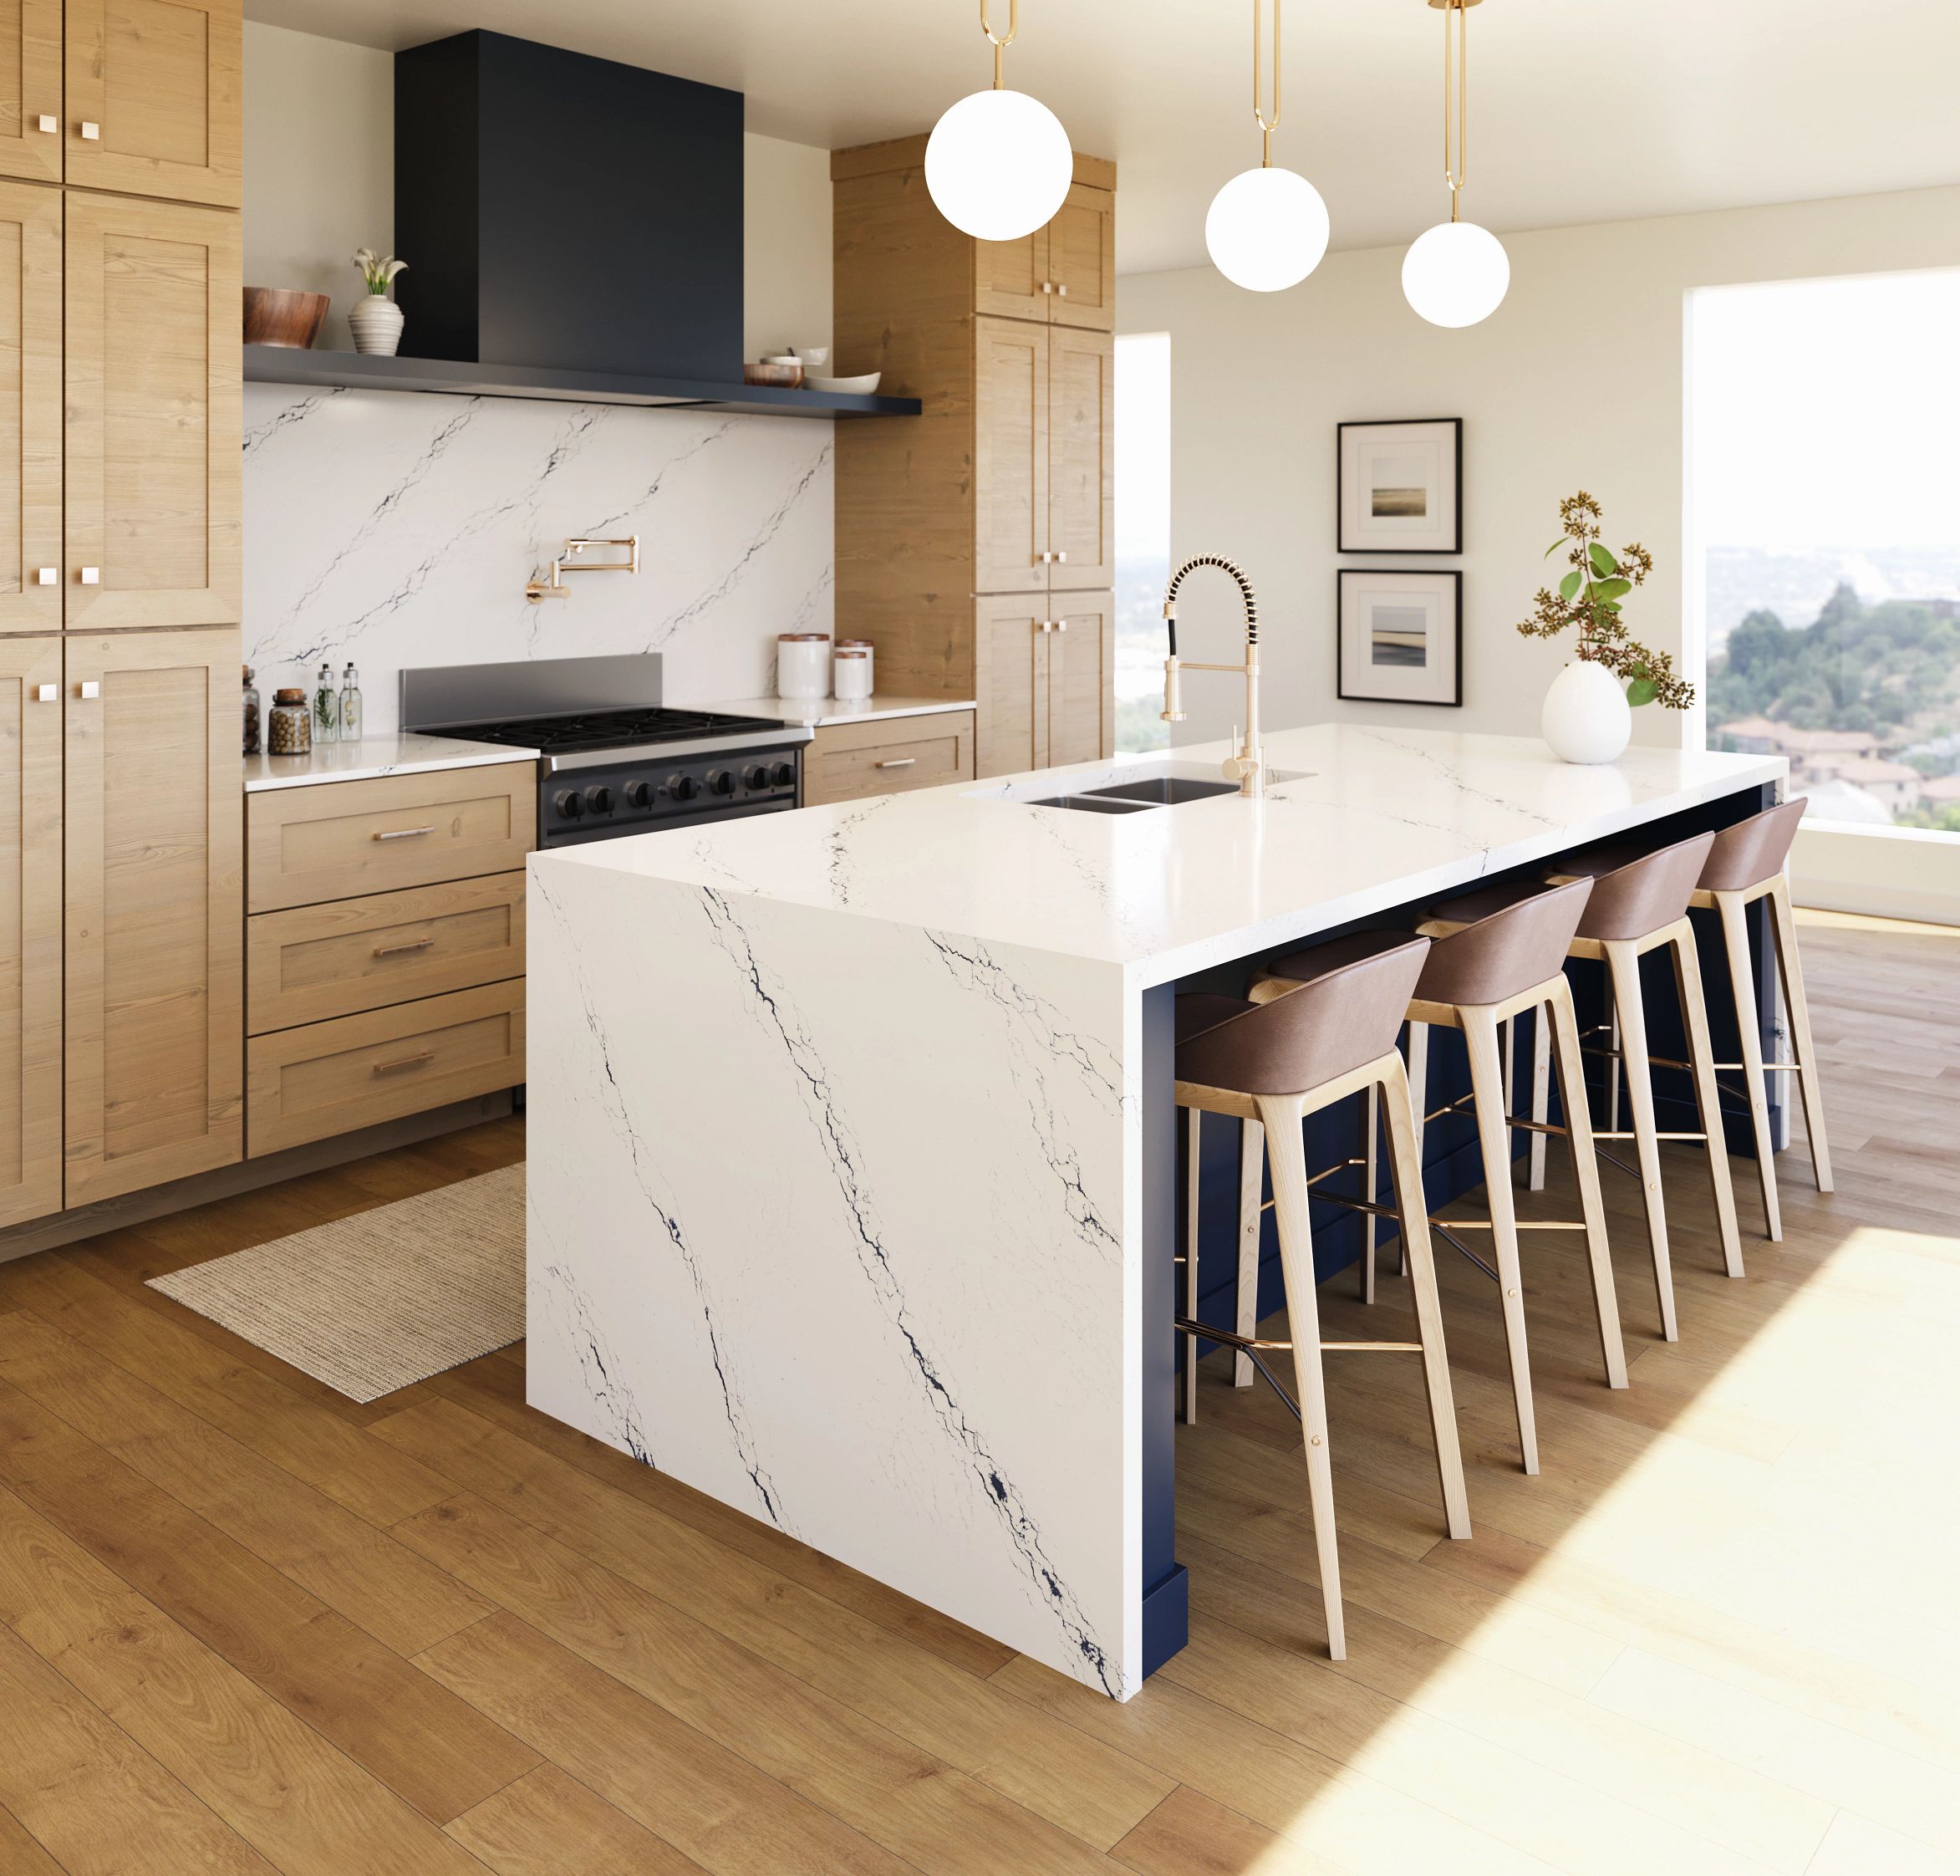 Inverness Cobalt Cambria Quartz Kitchen Countertops with Waterfall Panel